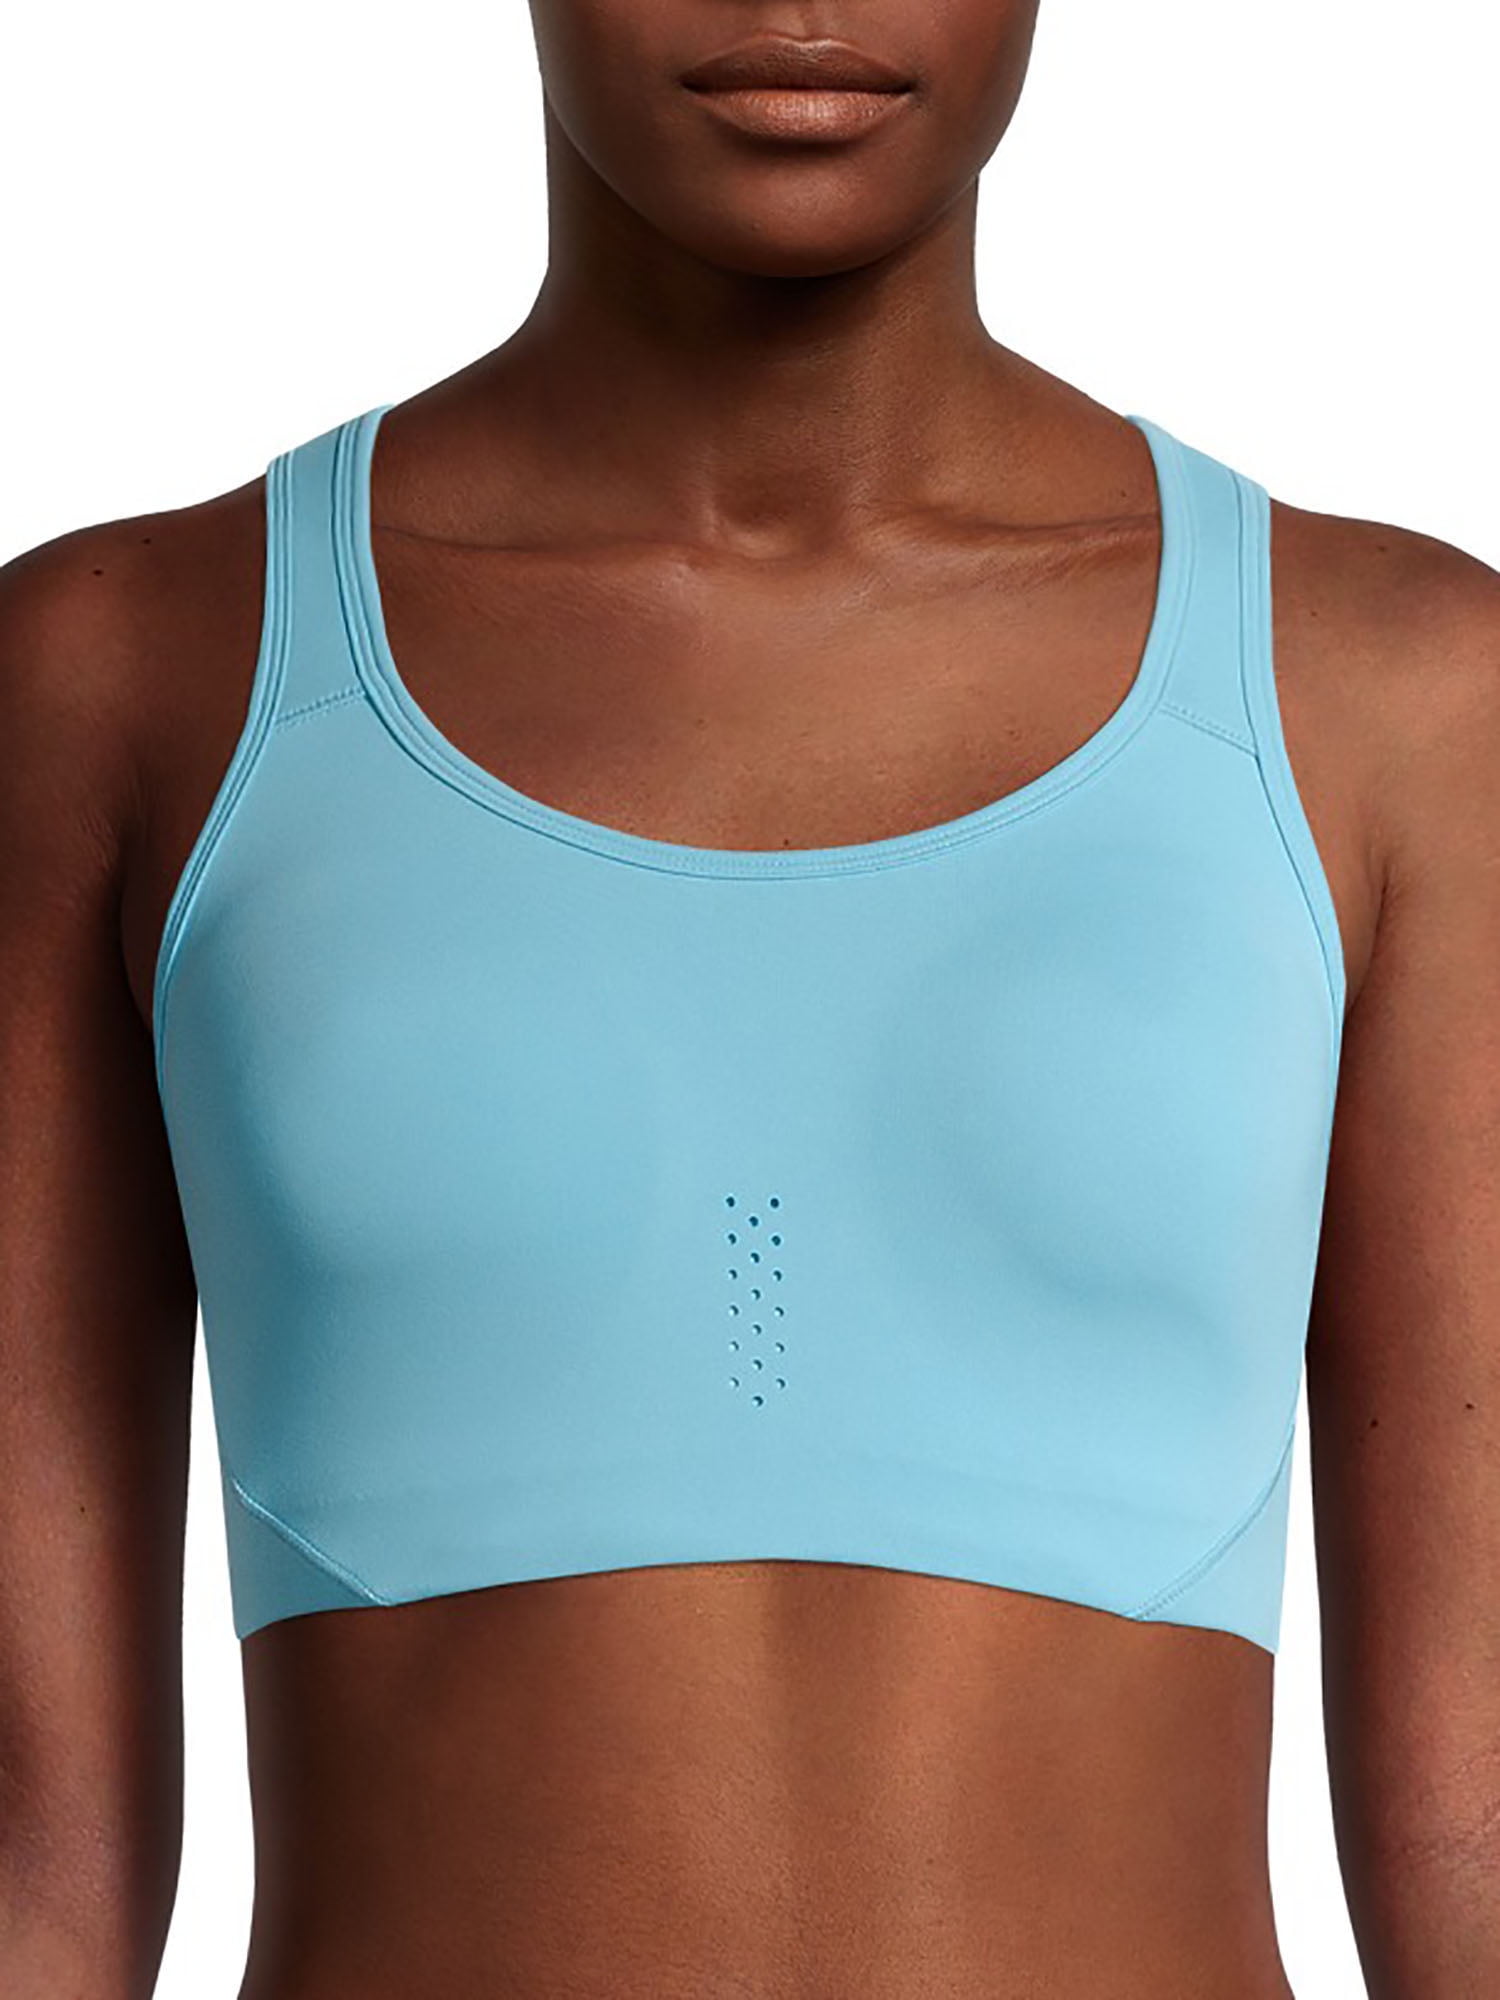 Avia Women's Plus Size Active Molded Cup Sports Bra #Ad #Size